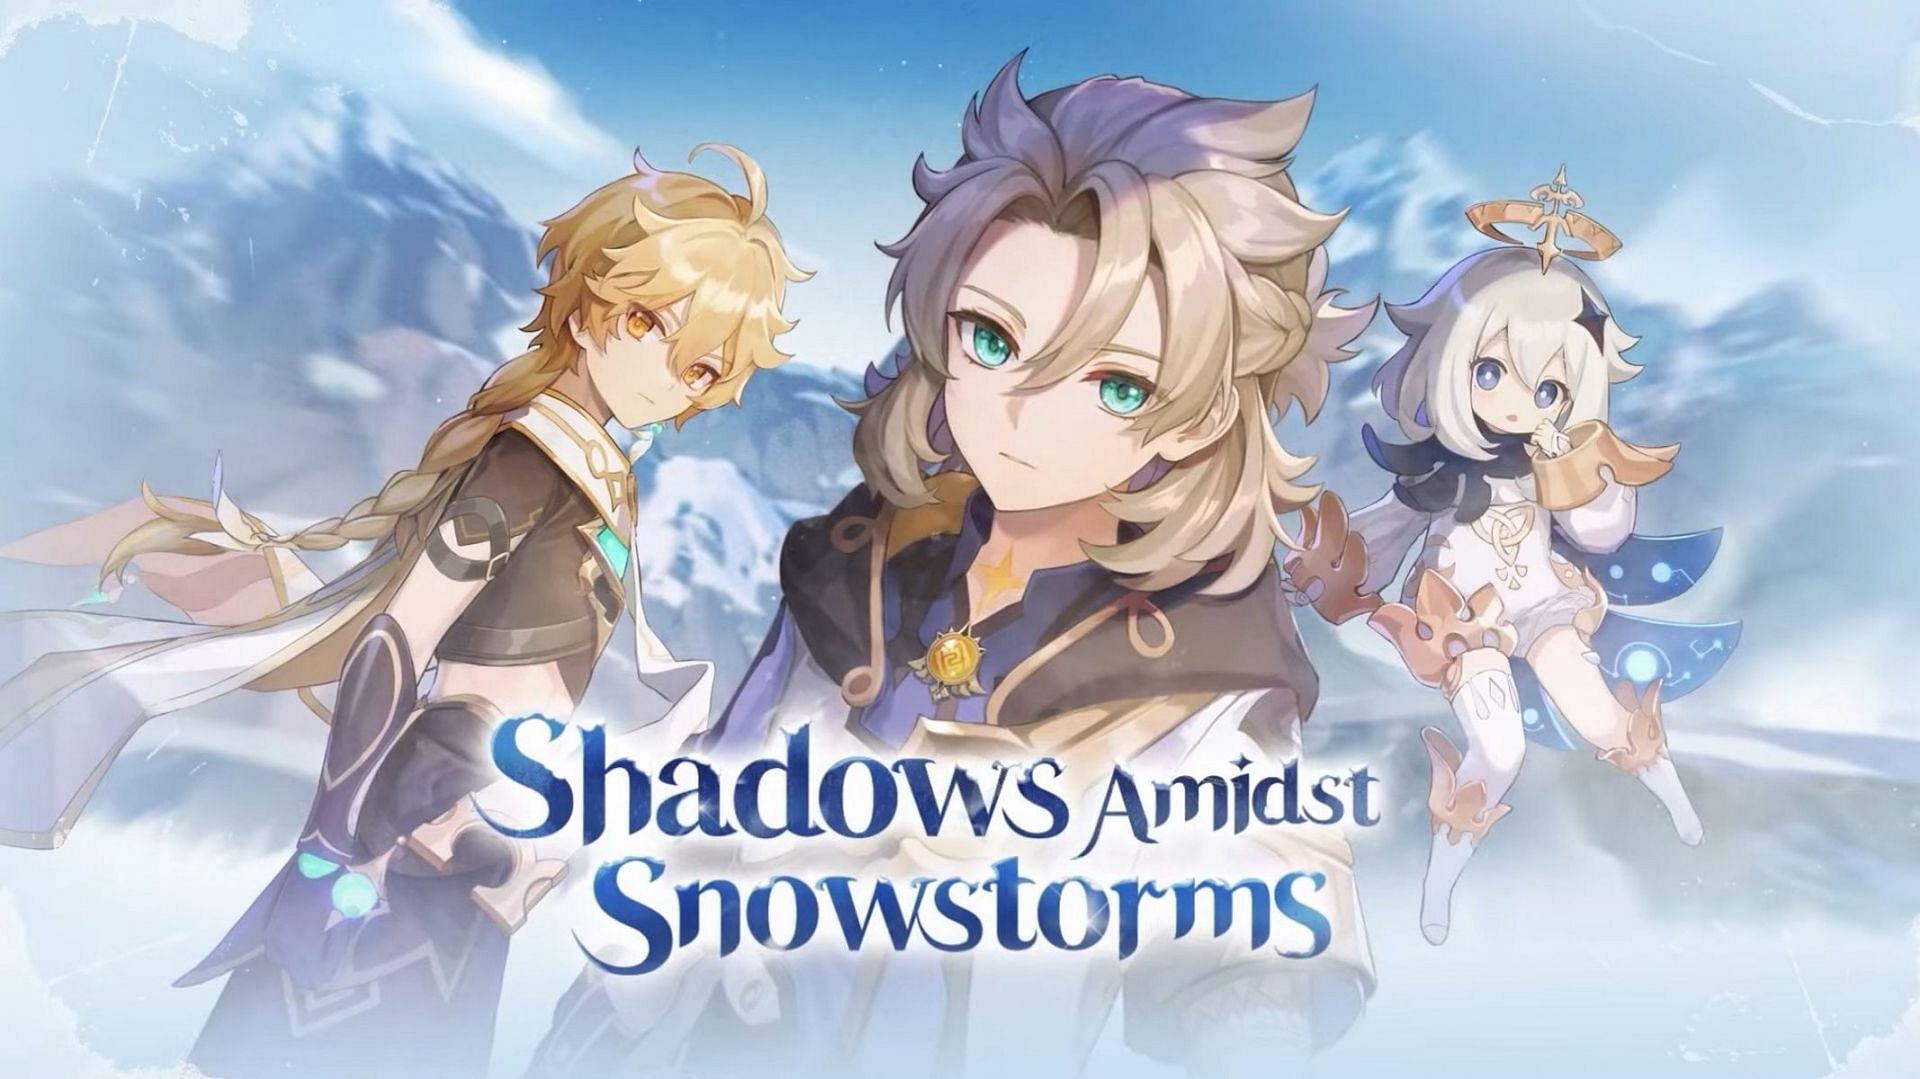 The official artwork for Shadows Amidst Snowstorms (Image via Genshin Impact)